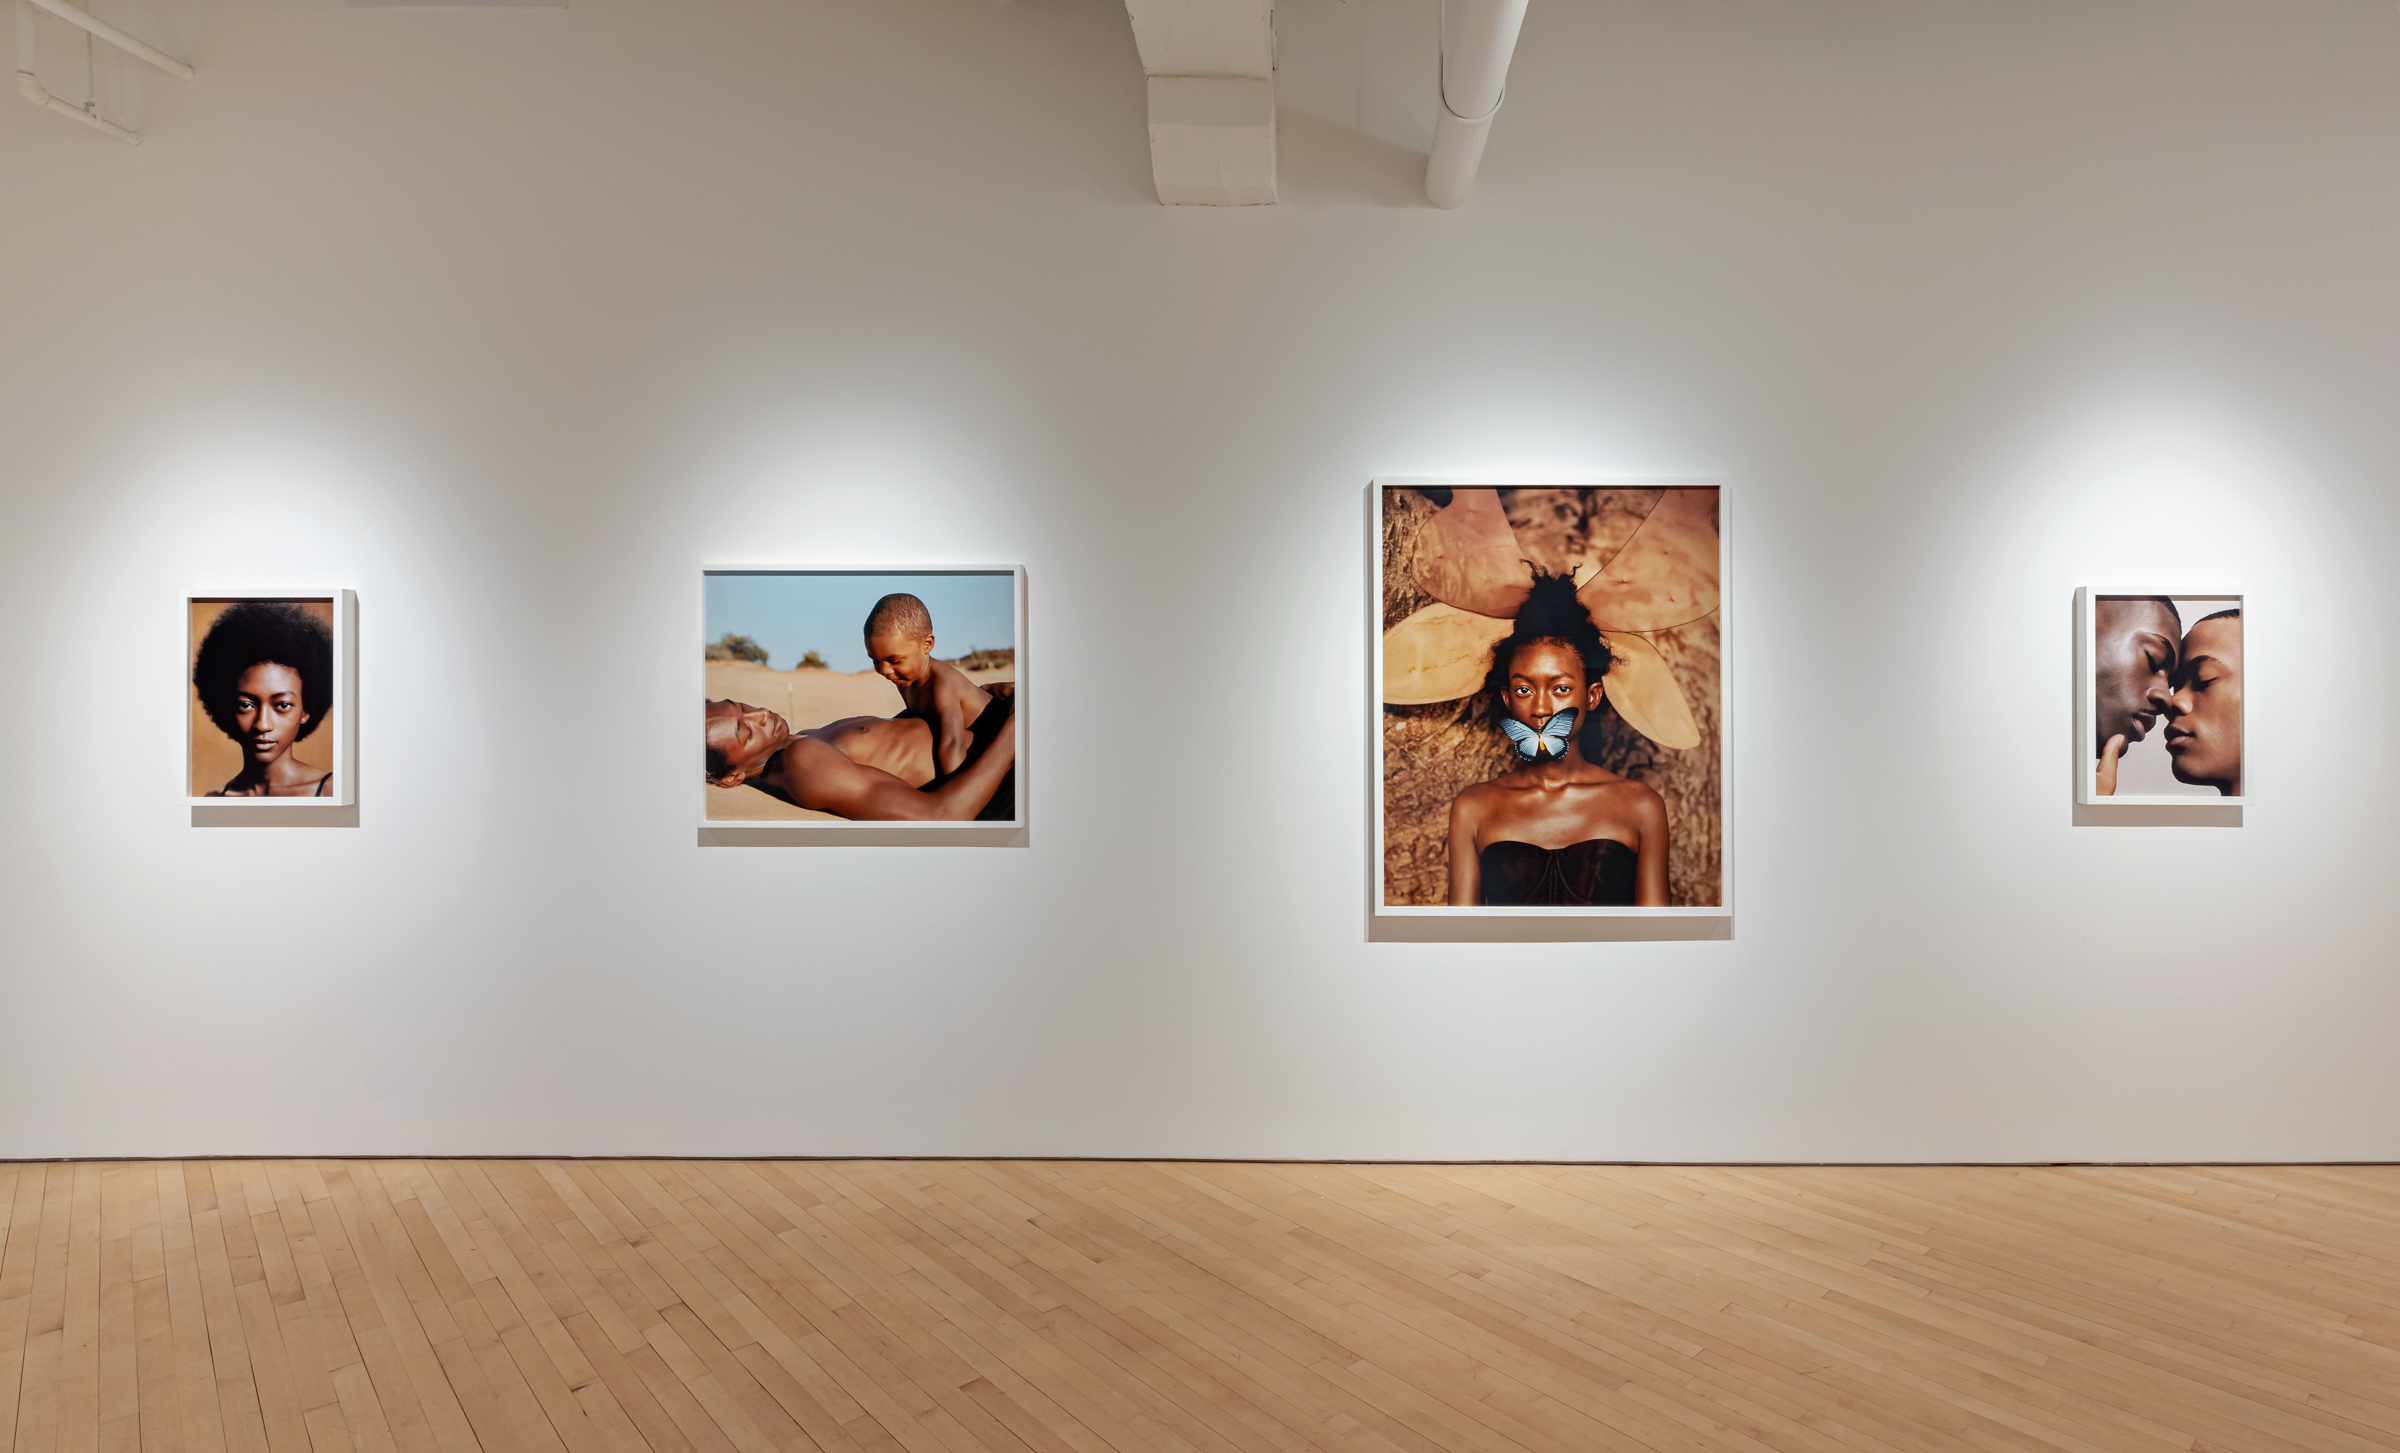     Tyler Mitchell, Cultural Turns, installation view at CONTACT Gallery, Toronto, 2022. © Tyler Mitchell. Courtesy of the artist, Jack Shainman Gallery, New York, and CONTACT. Photo: Toni Hafkenscheid

